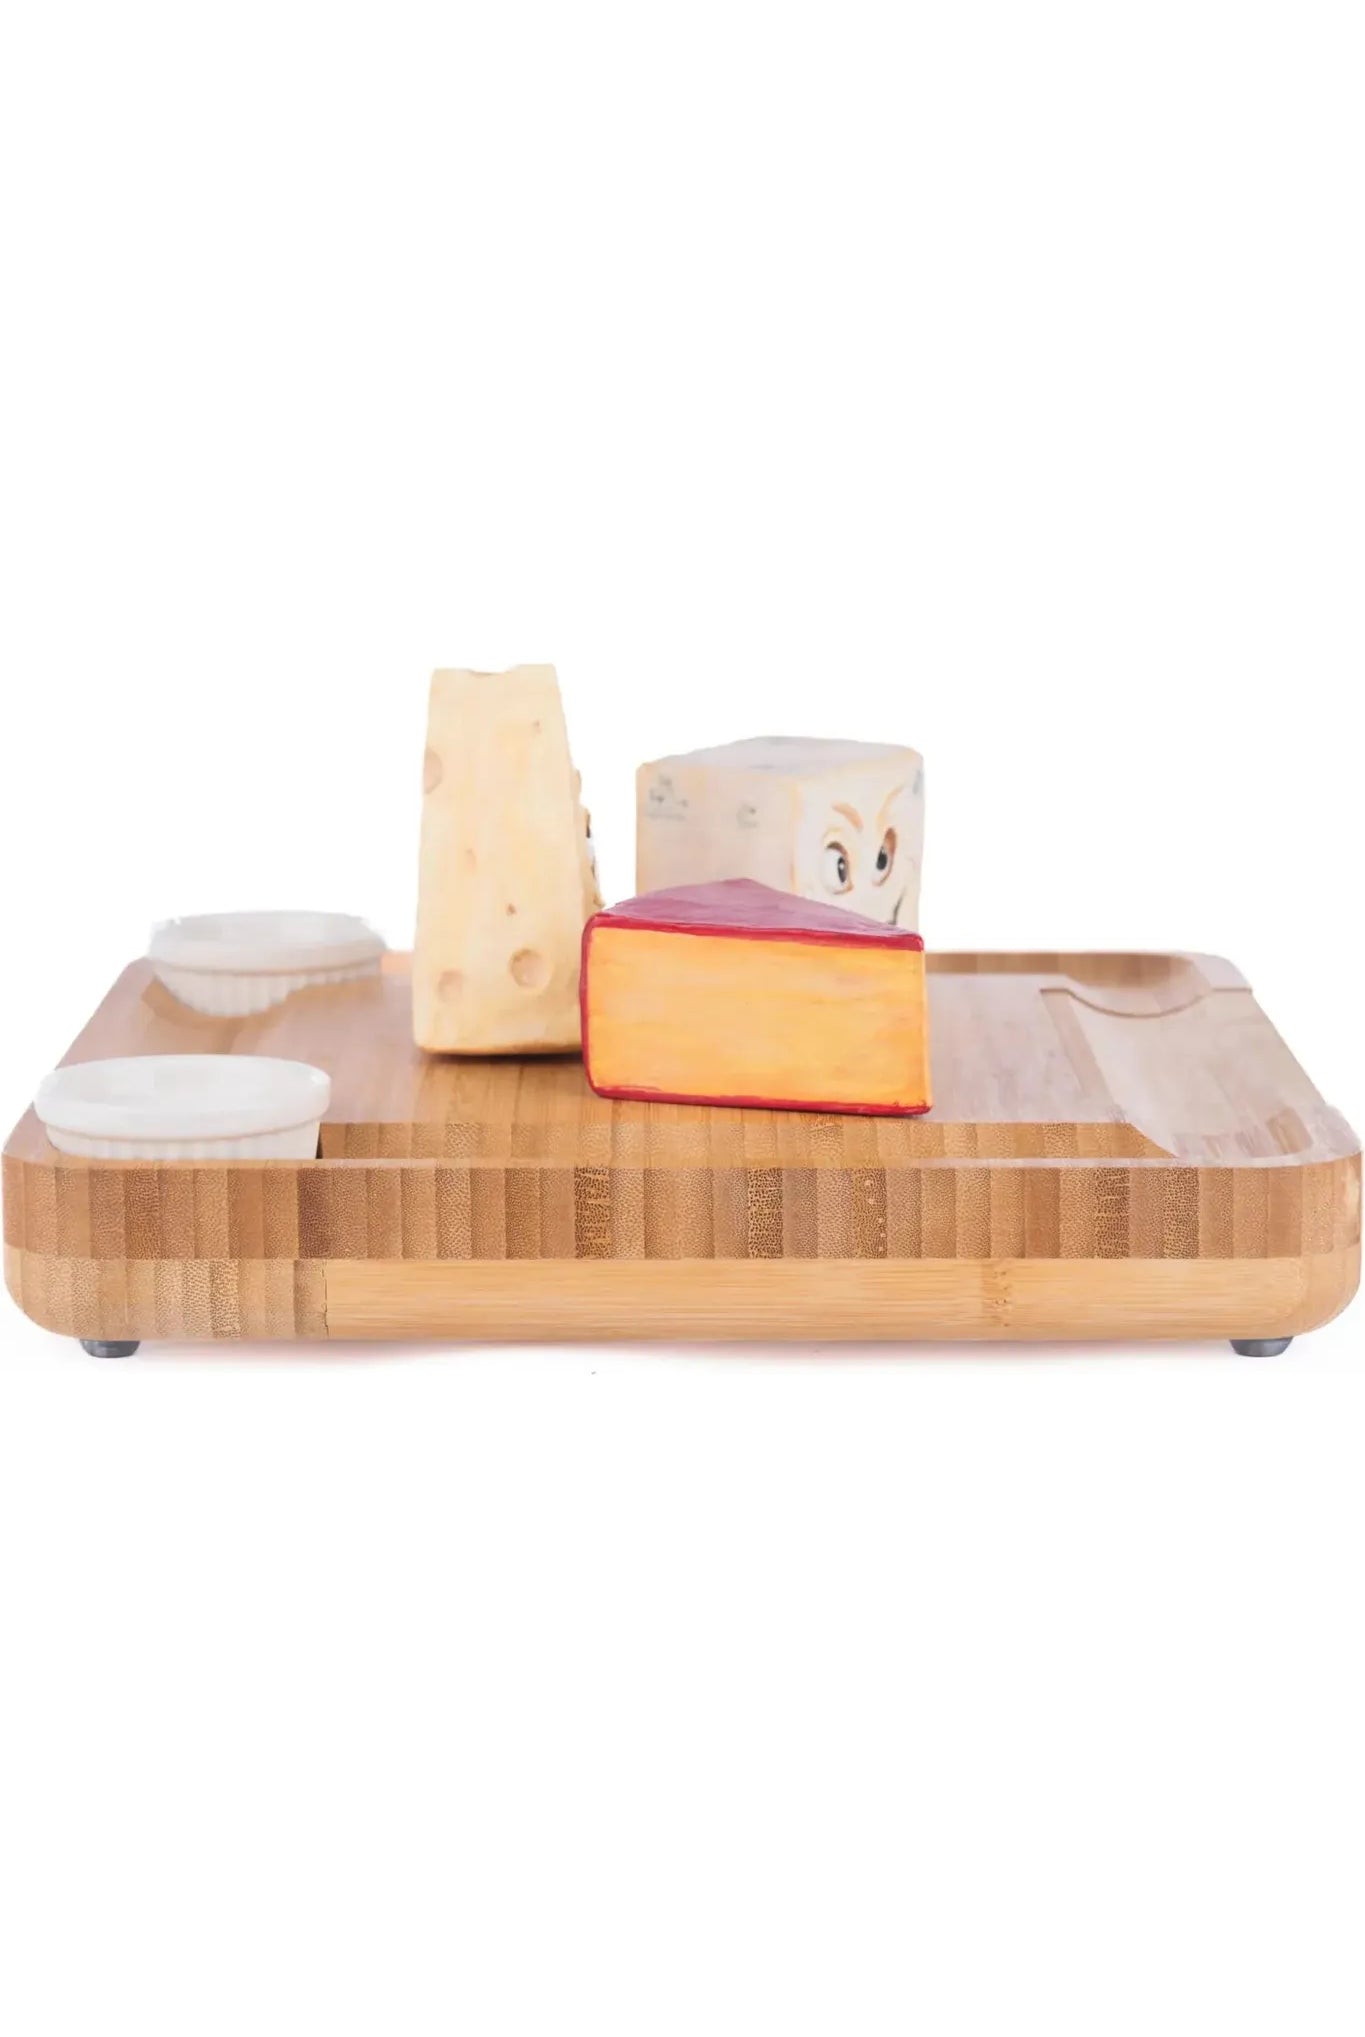 Shop For Creepy Cheeses On Charcutier Board With Knife Set 28-428199